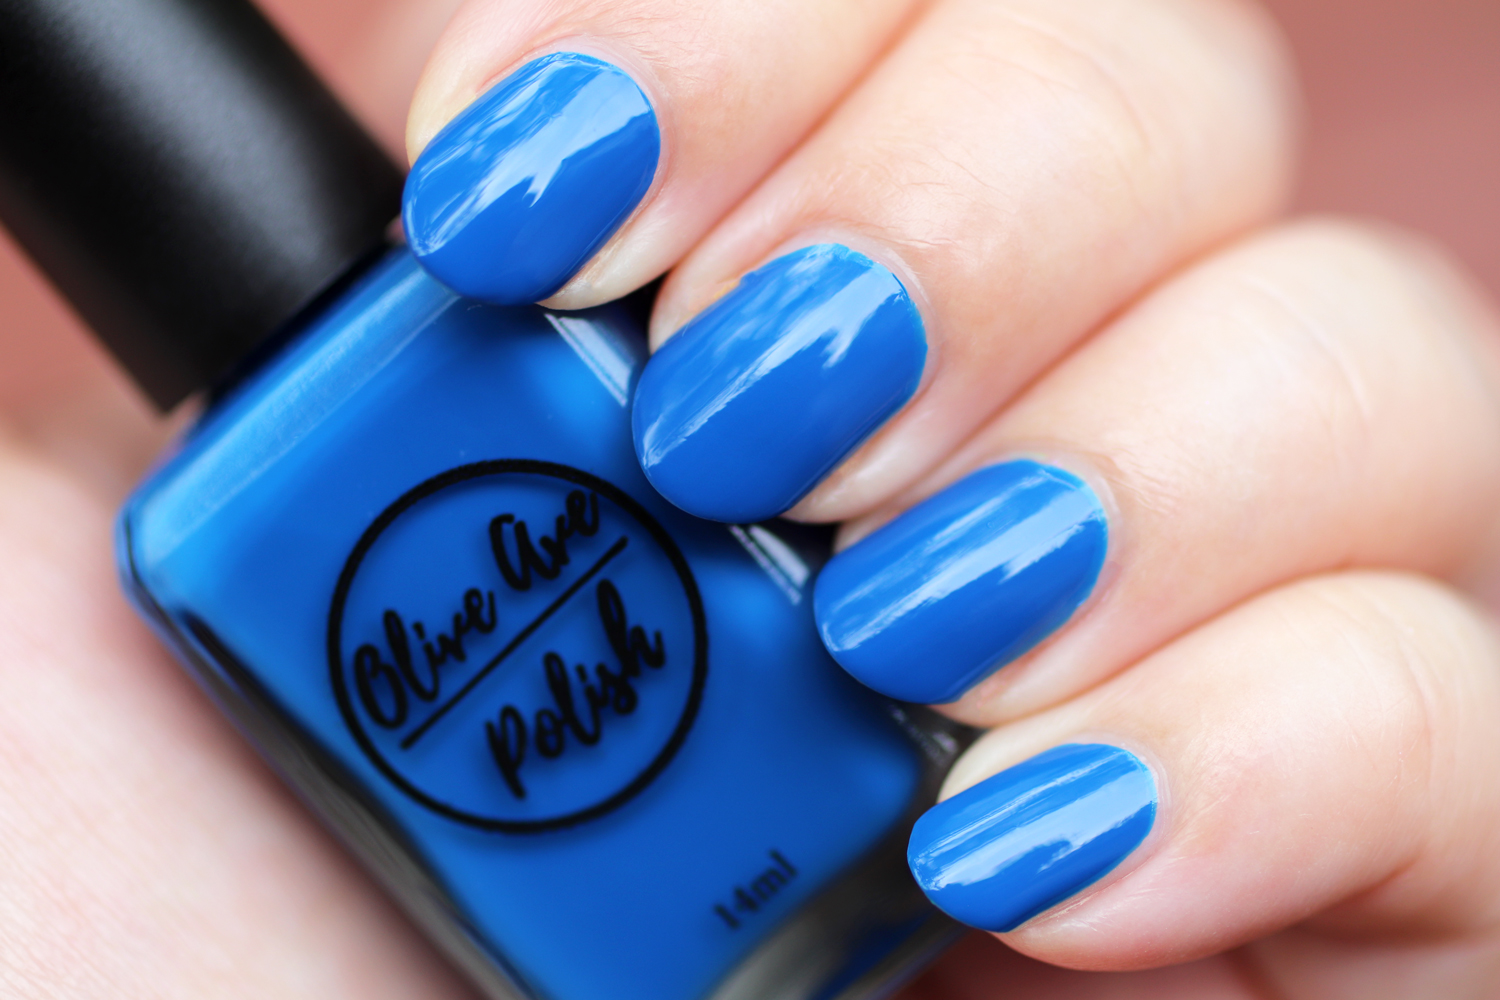 Roo cream blue nail polish by Olive Ave